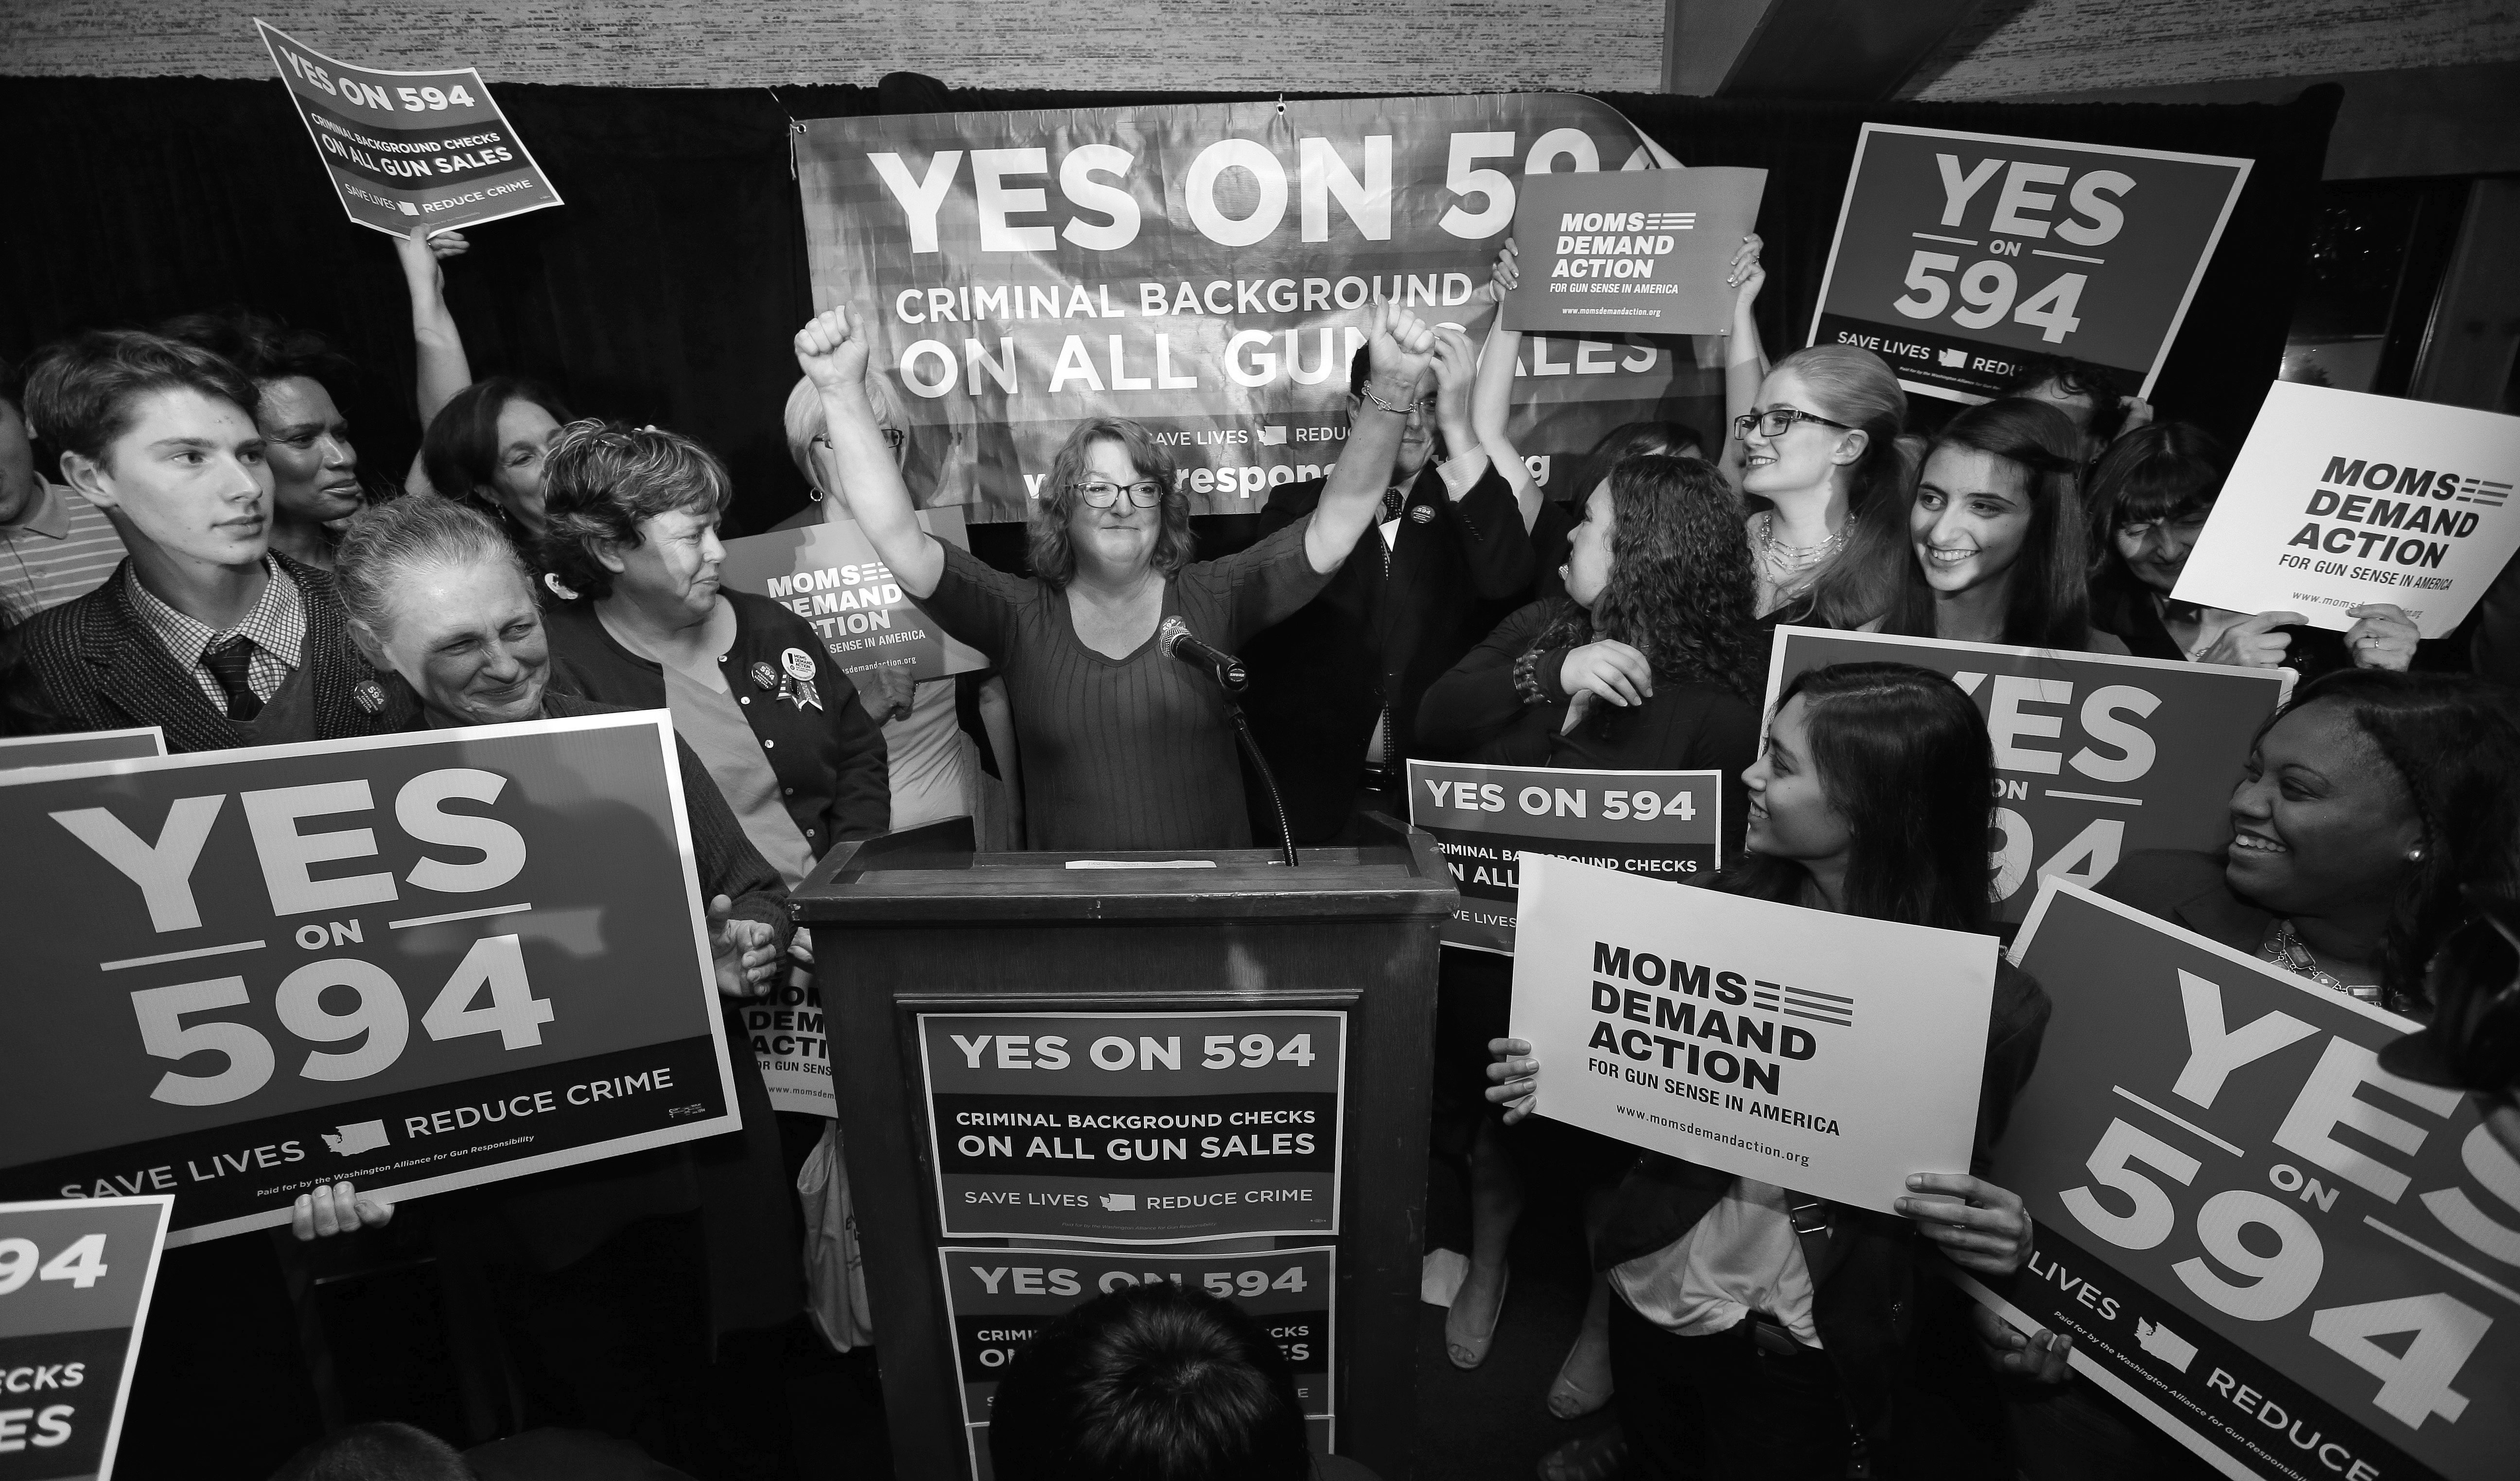 Cheryl Stumbo, center, raises her arms as she finishes speaking at an election night party for Initiative 594, a measure seeking universal background checks on gun sales and transfers, Tuesday, Nov. 4, 2014, in Seattle. Stumbo, the citizen sponsor of the initiative, is a survivor in the shooting at the Jewish Federation in Seattle in 2006. The initiative is one of two competing gun initiatives in Washington state. The other measure, Initiative 591, would prevent any such expansion of background checks. (AP Photo/Elaine Thompson)